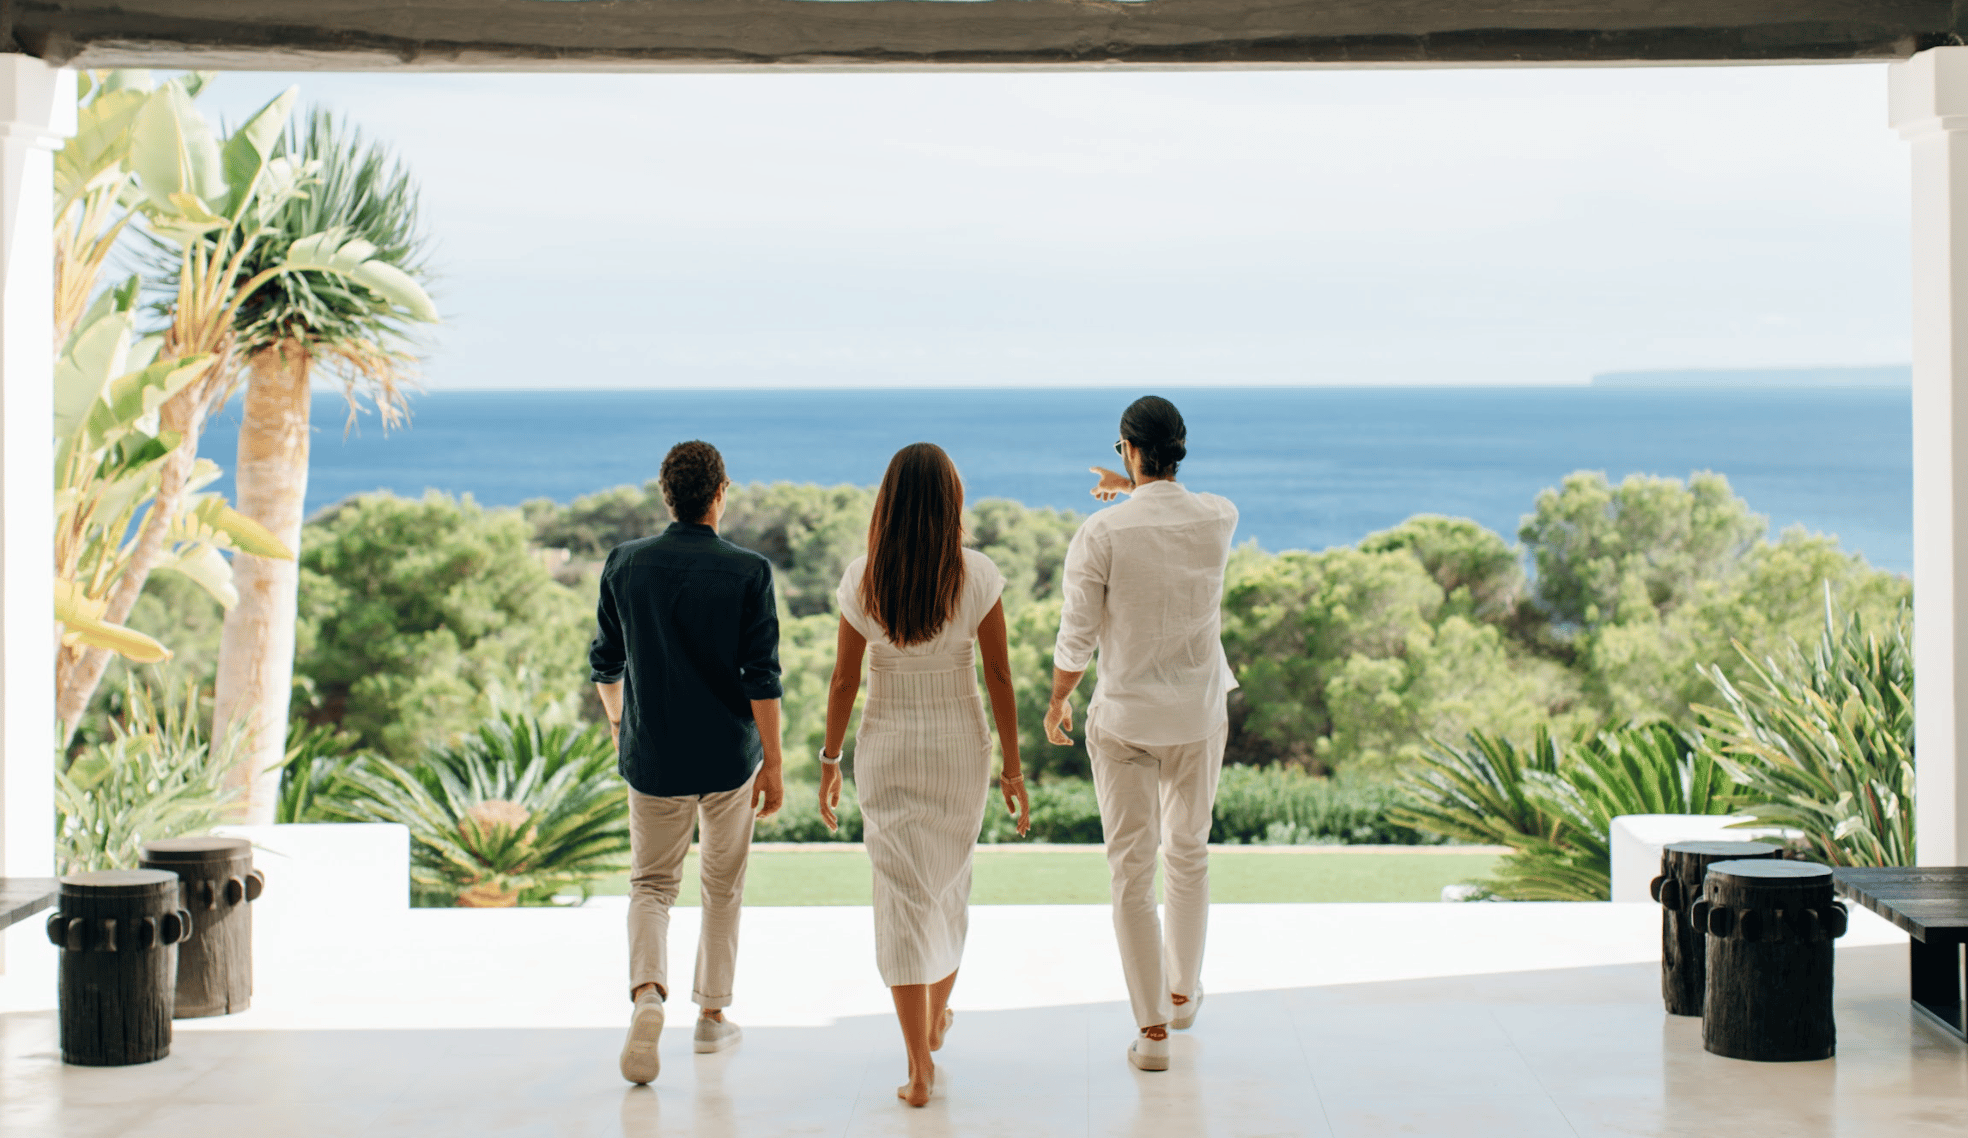 Paris-based Le Collectionist raises €60 million to add luxury to the holiday rental market